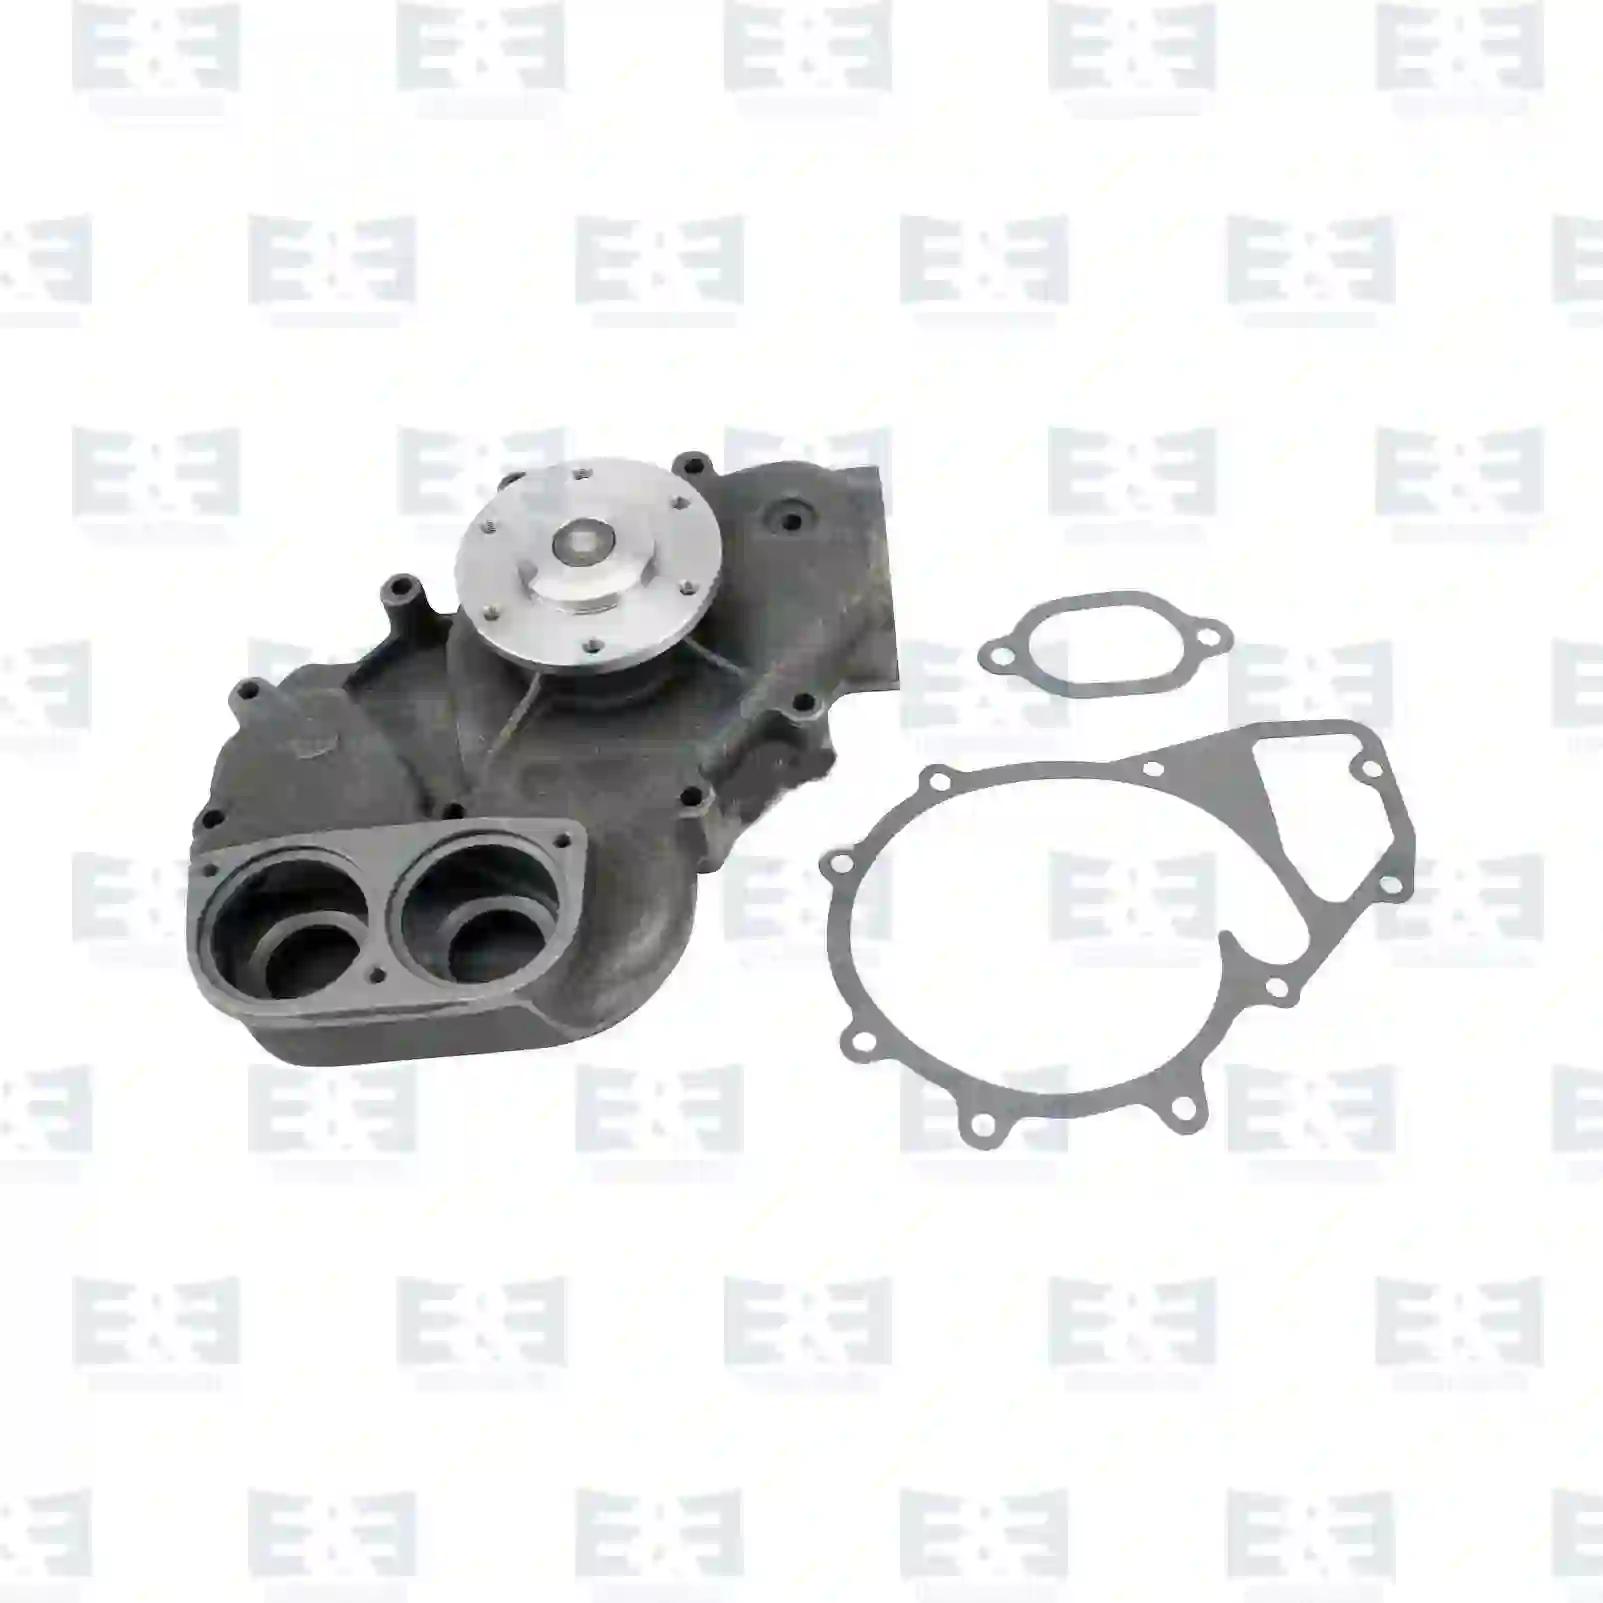 Water Pump Water pump, EE No 2E2203994 ,  oem no:51065005228, 51065006204, 51065006213, 51065006214, 51065006215, 51065006216, 51065006218, 51065006219, 51065006221, 51065006222, 51065006223, 51065006224, 51065006225, 51065006228, 51065006229, 51065009222, 51065009228, N1011000116, 4032002701, 4032003201, 4032003401, 4032003501, 4032004901, 4032004951, 4032007001, 403200700180, 4032010901, 5000281838, 8311999133, 8312000475 E&E Truck Spare Parts | Truck Spare Parts, Auotomotive Spare Parts